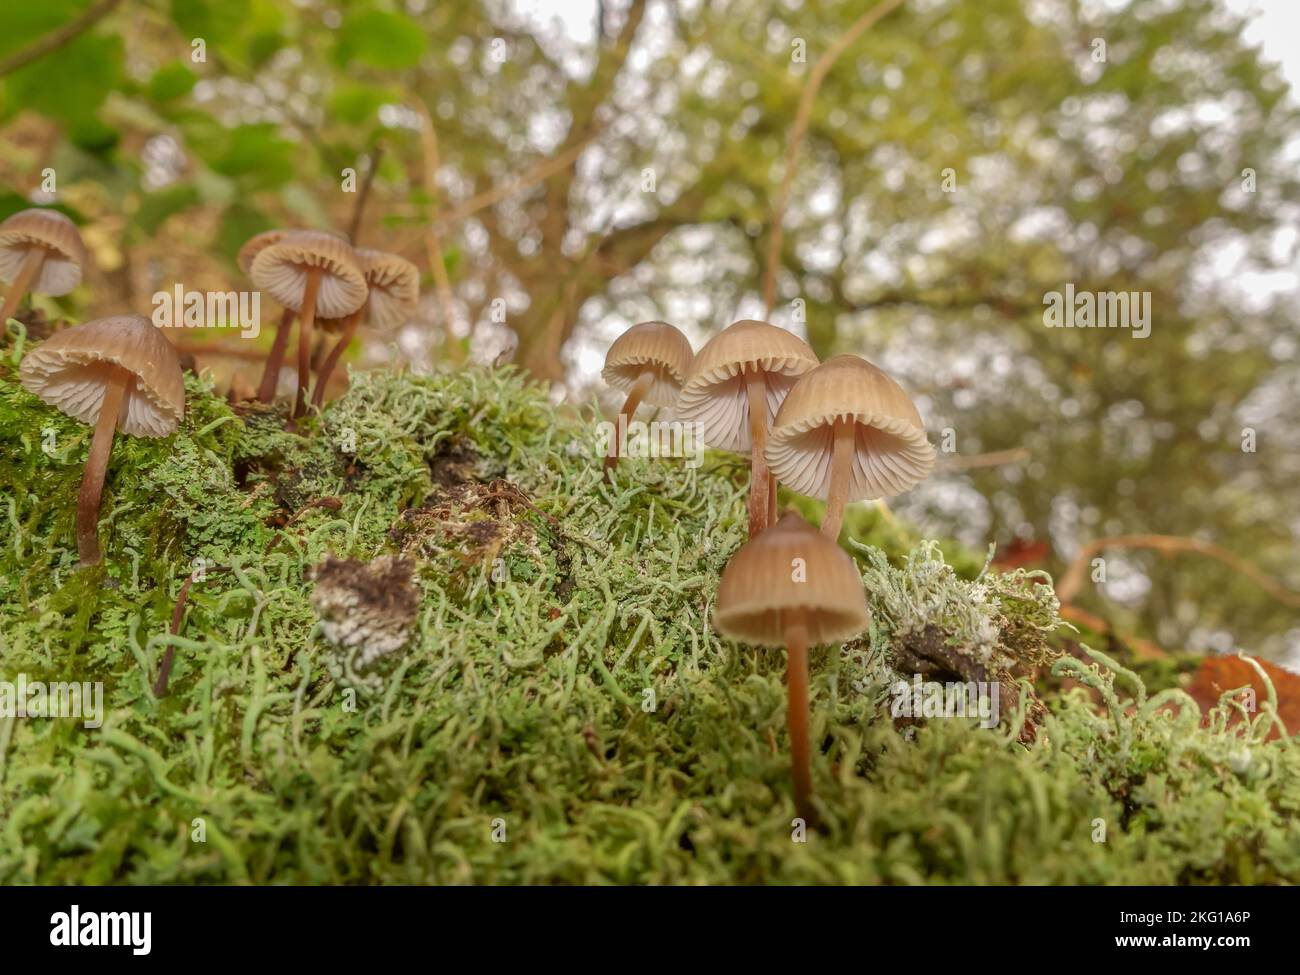 Common bonnet (Mycena galericulata) growing on a nature reseve in the Herefordshire UK countryside. Stock Photo